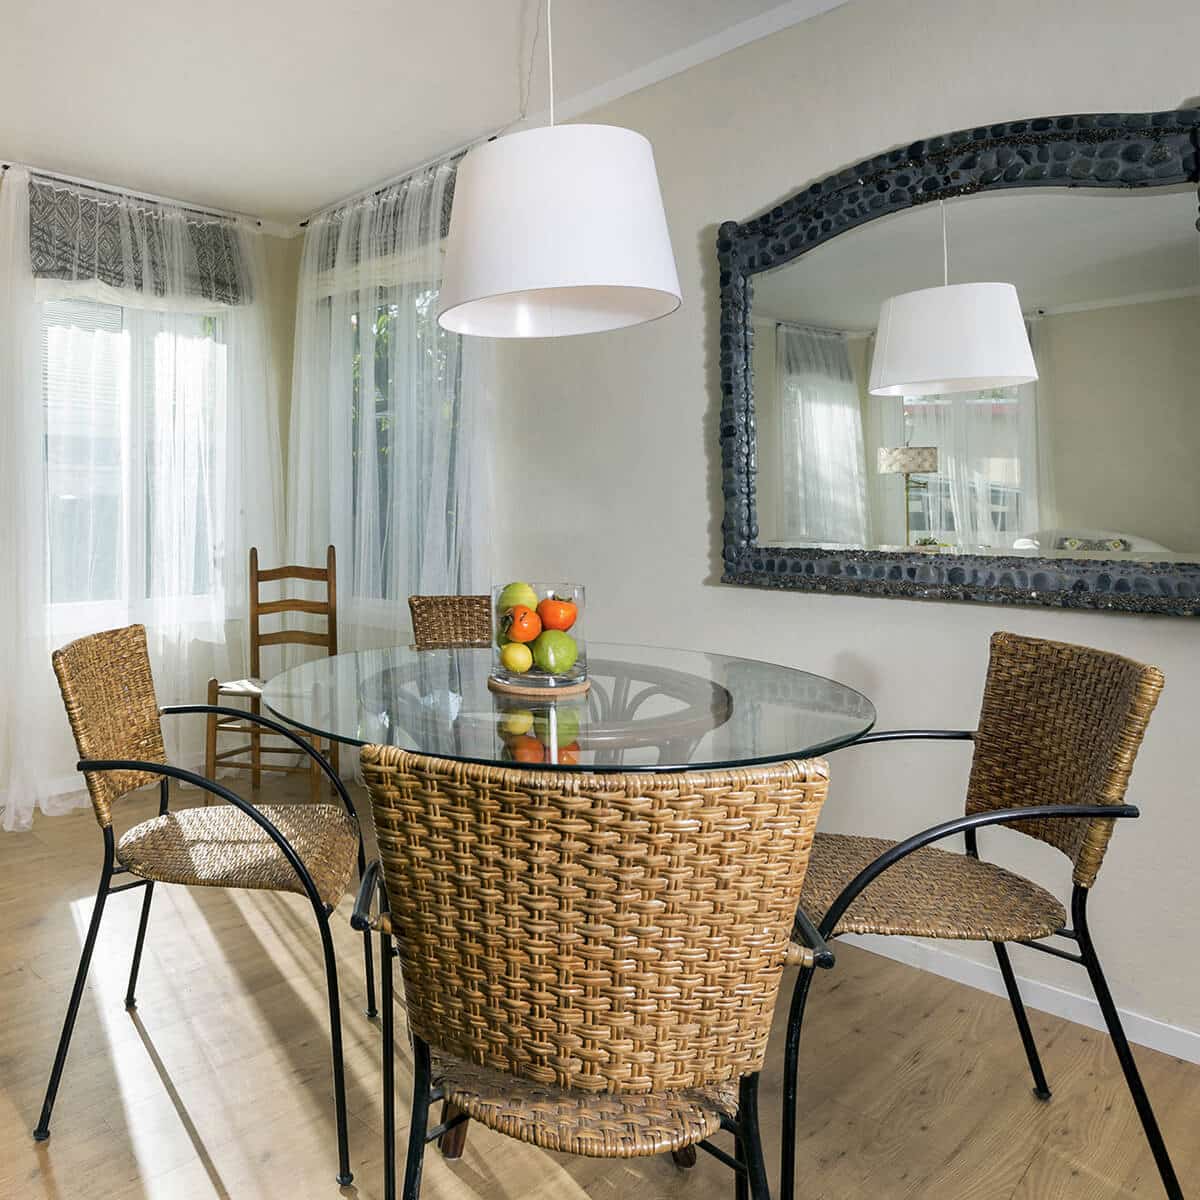 Tempered Glass Round Table Top with a Feeling of Luxury Home Interior Settings. Rattan weaved furniture for casual styled dining